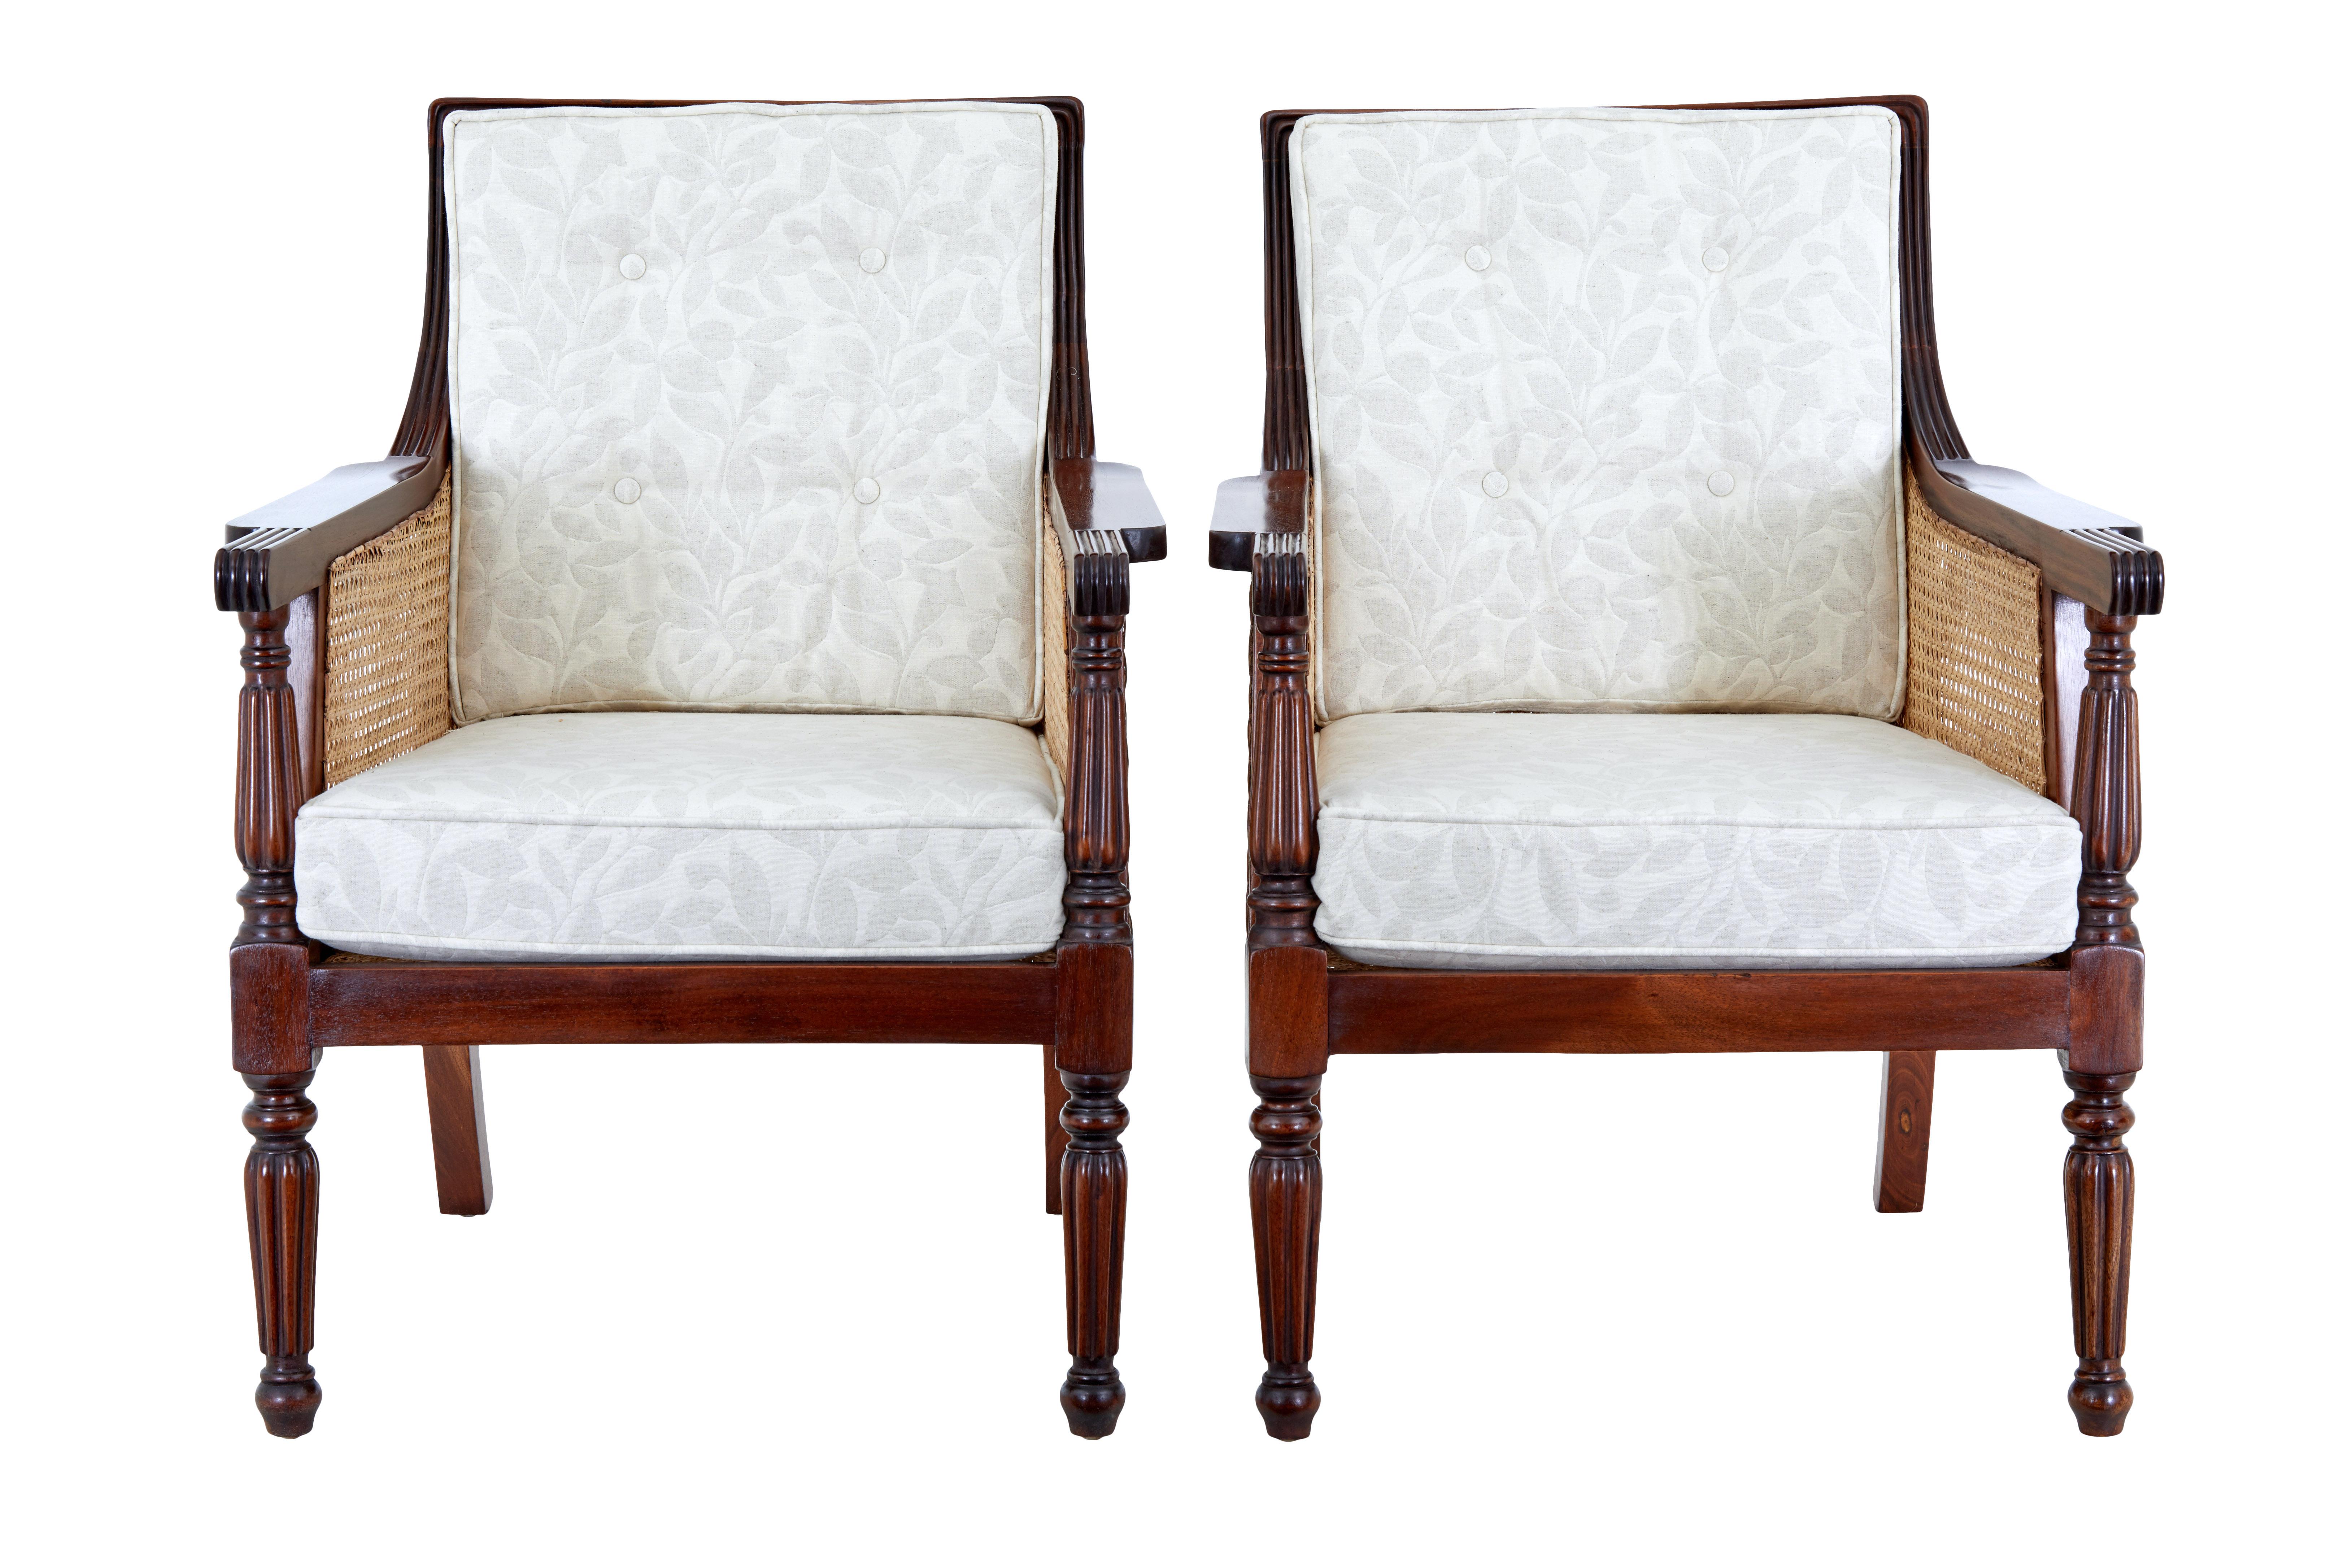 Pair of bergere cane work lounge chairs circa 1990.

Beautiful pair of regency inspired bergere armchairs presented in a rich polished mahogany.  Shaped backs, with turned supports and legs. Brand new padded seat and back rest